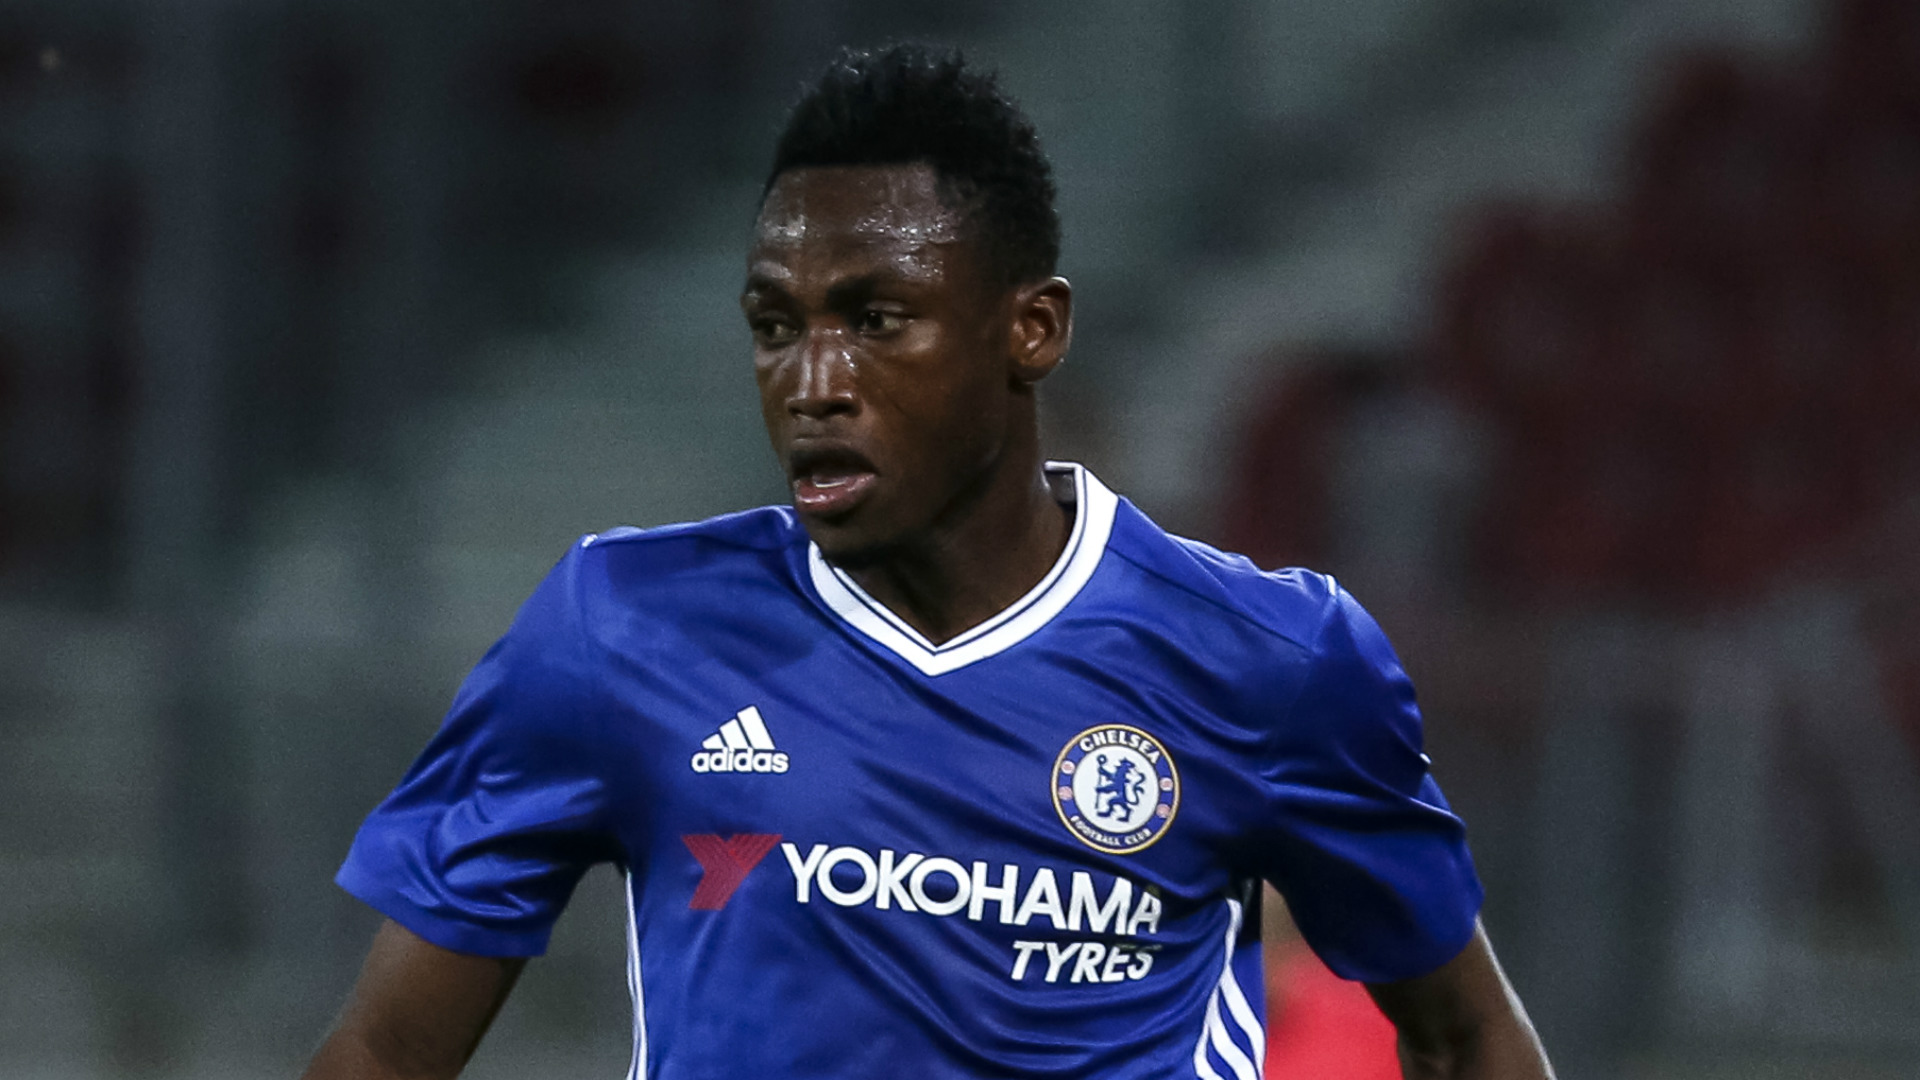 Chelsea full-back Baba Rahman set for six-month PAOK loan move